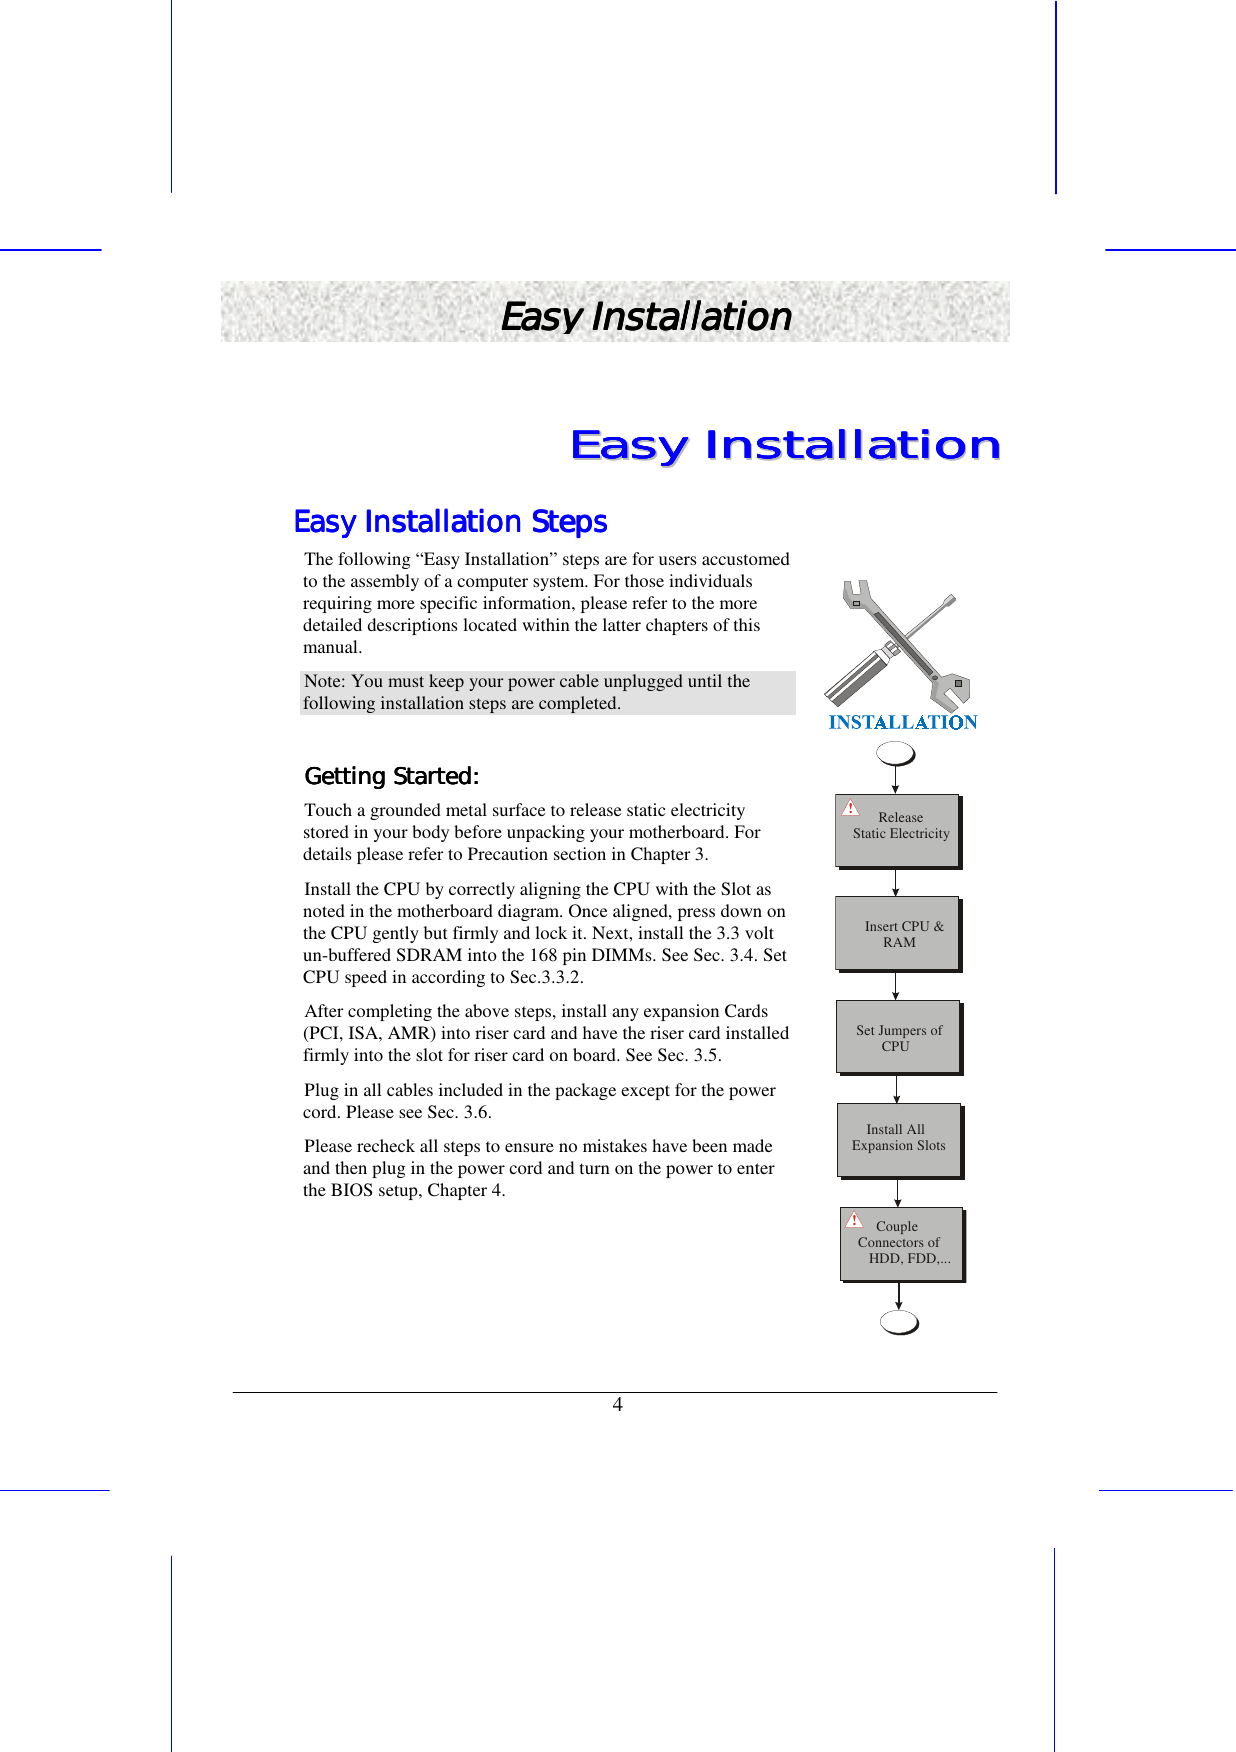   4 Easy InstallaEasy InstallaEasy InstallaEasy Installationtiontiontion    EEEEEEEEaaaaaaaassssssssyyyyyyyy        IIIIIIIInnnnnnnnssssssssttttttttaaaaaaaallllllllllllllllaaaaaaaattttttttiiiiiiiioooooooonnnnnnnn        Easy Installation StepsEasy Installation StepsEasy Installation StepsEasy Installation Steps    The following “Easy Installation” steps are for users accustomed to the assembly of a computer system. For those individuals requiring more specific information, please refer to the more detailed descriptions located within the latter chapters of this manual.  Note: You must keep your power cable unplugged until the following installation steps are completed.  Getting Started: Getting Started: Getting Started: Getting Started:     Touch a grounded metal surface to release static electricity stored in your body before unpacking your motherboard. For details please refer to Precaution section in Chapter 3. Install the CPU by correctly aligning the CPU with the Slot as noted in the motherboard diagram. Once aligned, press down on the CPU gently but firmly and lock it. Next, install the 3.3 volt un-buffered SDRAM into the 168 pin DIMMs. See Sec. 3.4. Set CPU speed in according to Sec.3.3.2. After completing the above steps, install any expansion Cards (PCI, ISA, AMR) into riser card and have the riser card installed firmly into the slot for riser card on board. See Sec. 3.5.  Plug in all cables included in the package except for the power cord. Please see Sec. 3.6. Please recheck all steps to ensure no mistakes have been made and then plug in the power cord and turn on the power to enter the BIOS setup, Chapter 4.          ReleaseStatic ElectricityInsert CPU &amp;     RAM    Install AllExpansion SlotsSet Jumpers of       CPU     CoupleConnectors of   HDD, FDD,...!! 